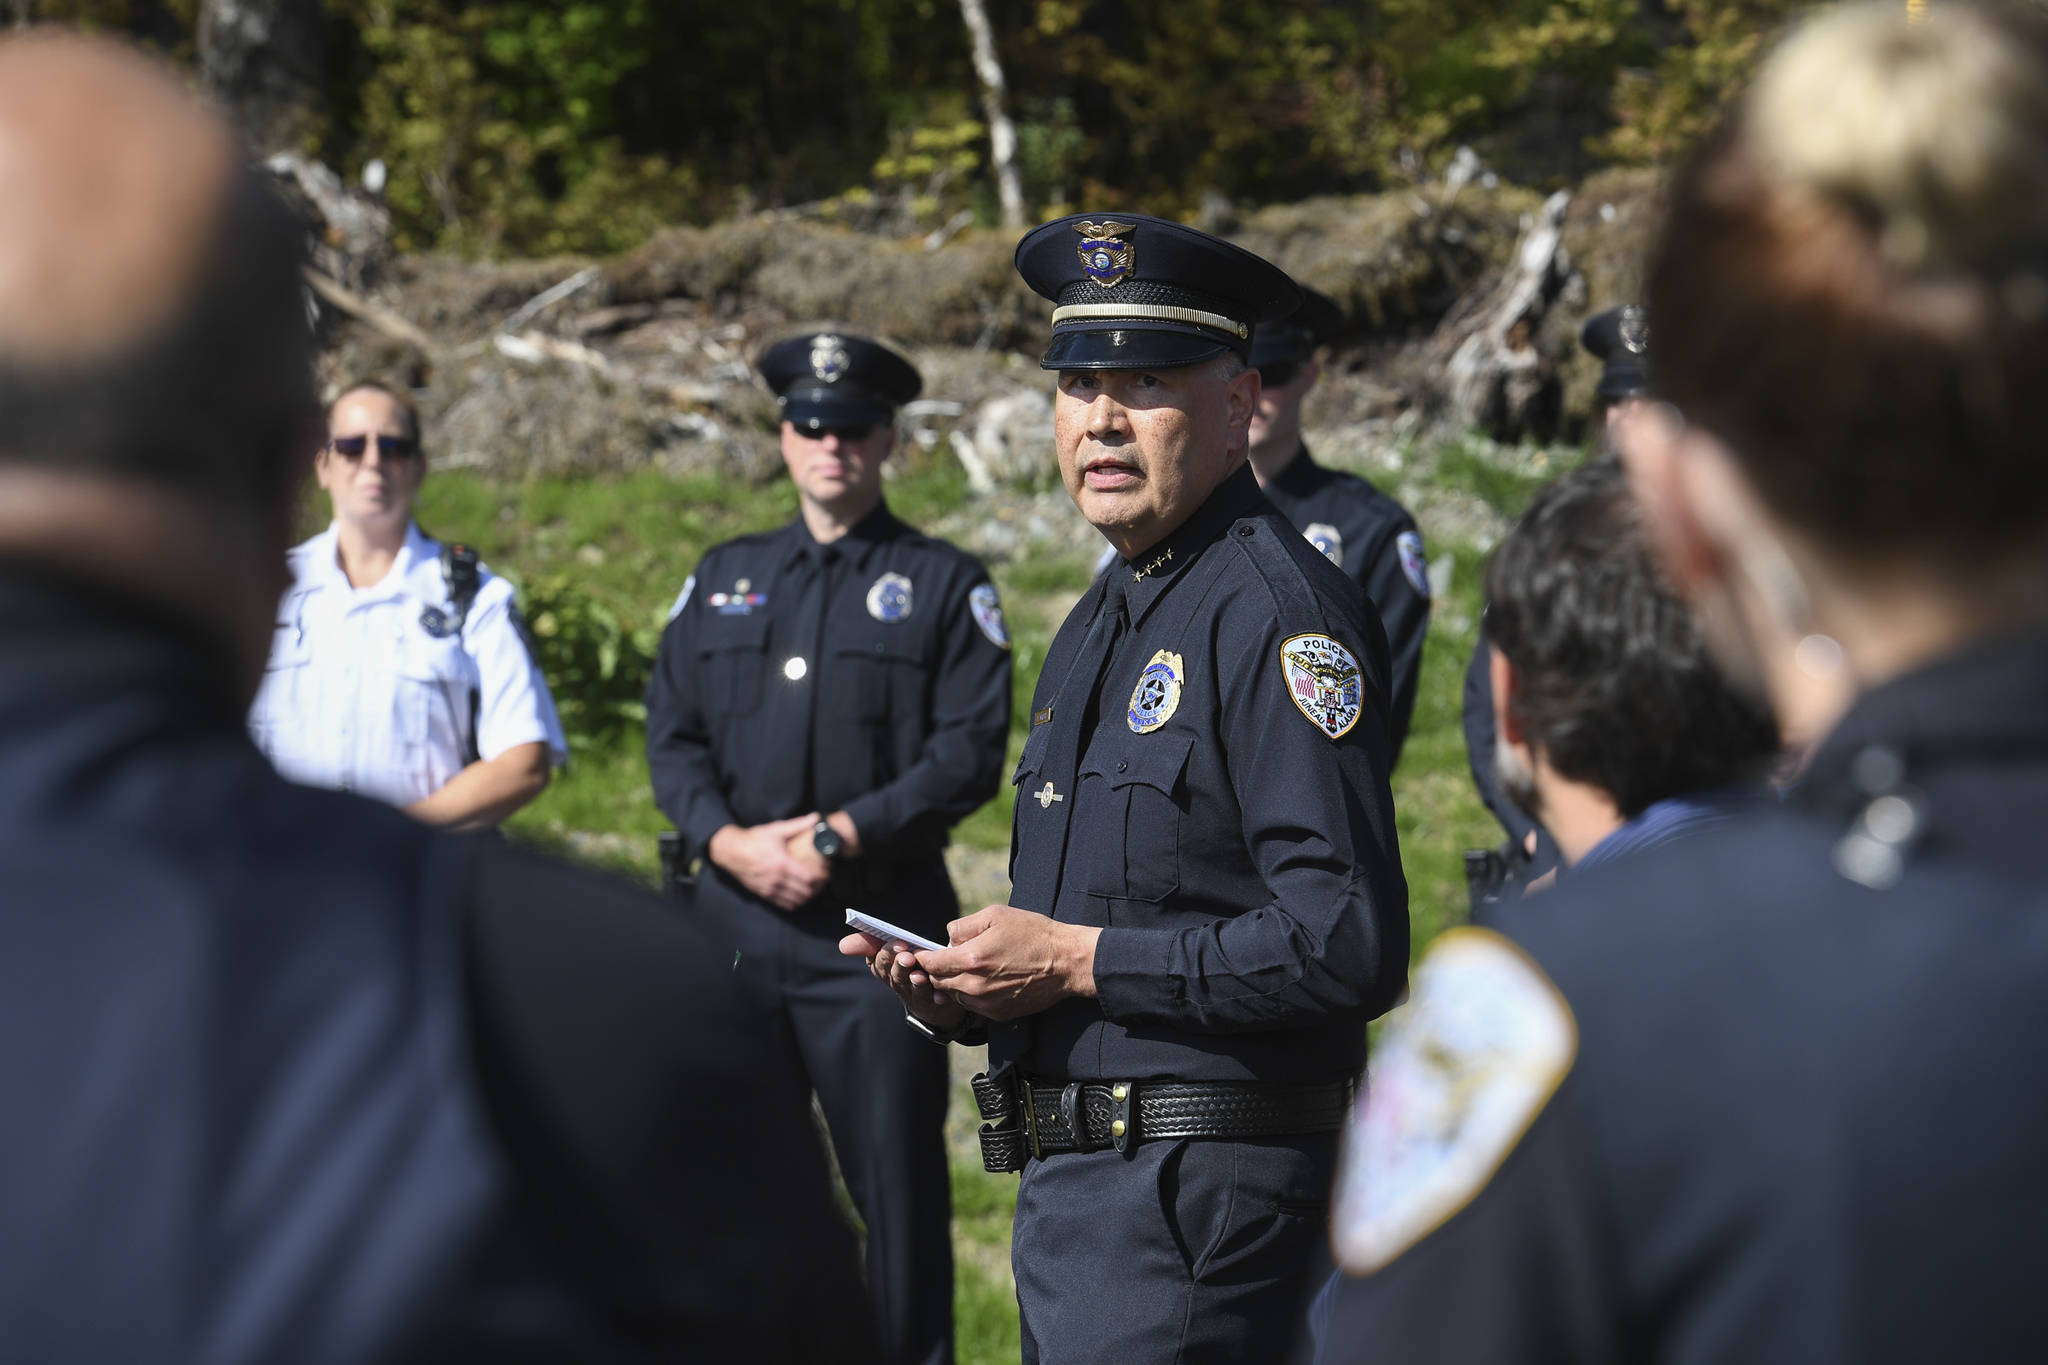 Juneau Police Department Chief Ed Mercer and his officers attend a ribbon-cutting ceremony on Karl Reishus Boulevard to commemorate the near completion of the Pederson Hill Subdivision on Friday, Sept. 6, 2019. Reishus was a Juneau Police Department officer who died in 1992 when he fell from a 40-foot tower during a training exercise. (Michael Penn | Juneau Empire)